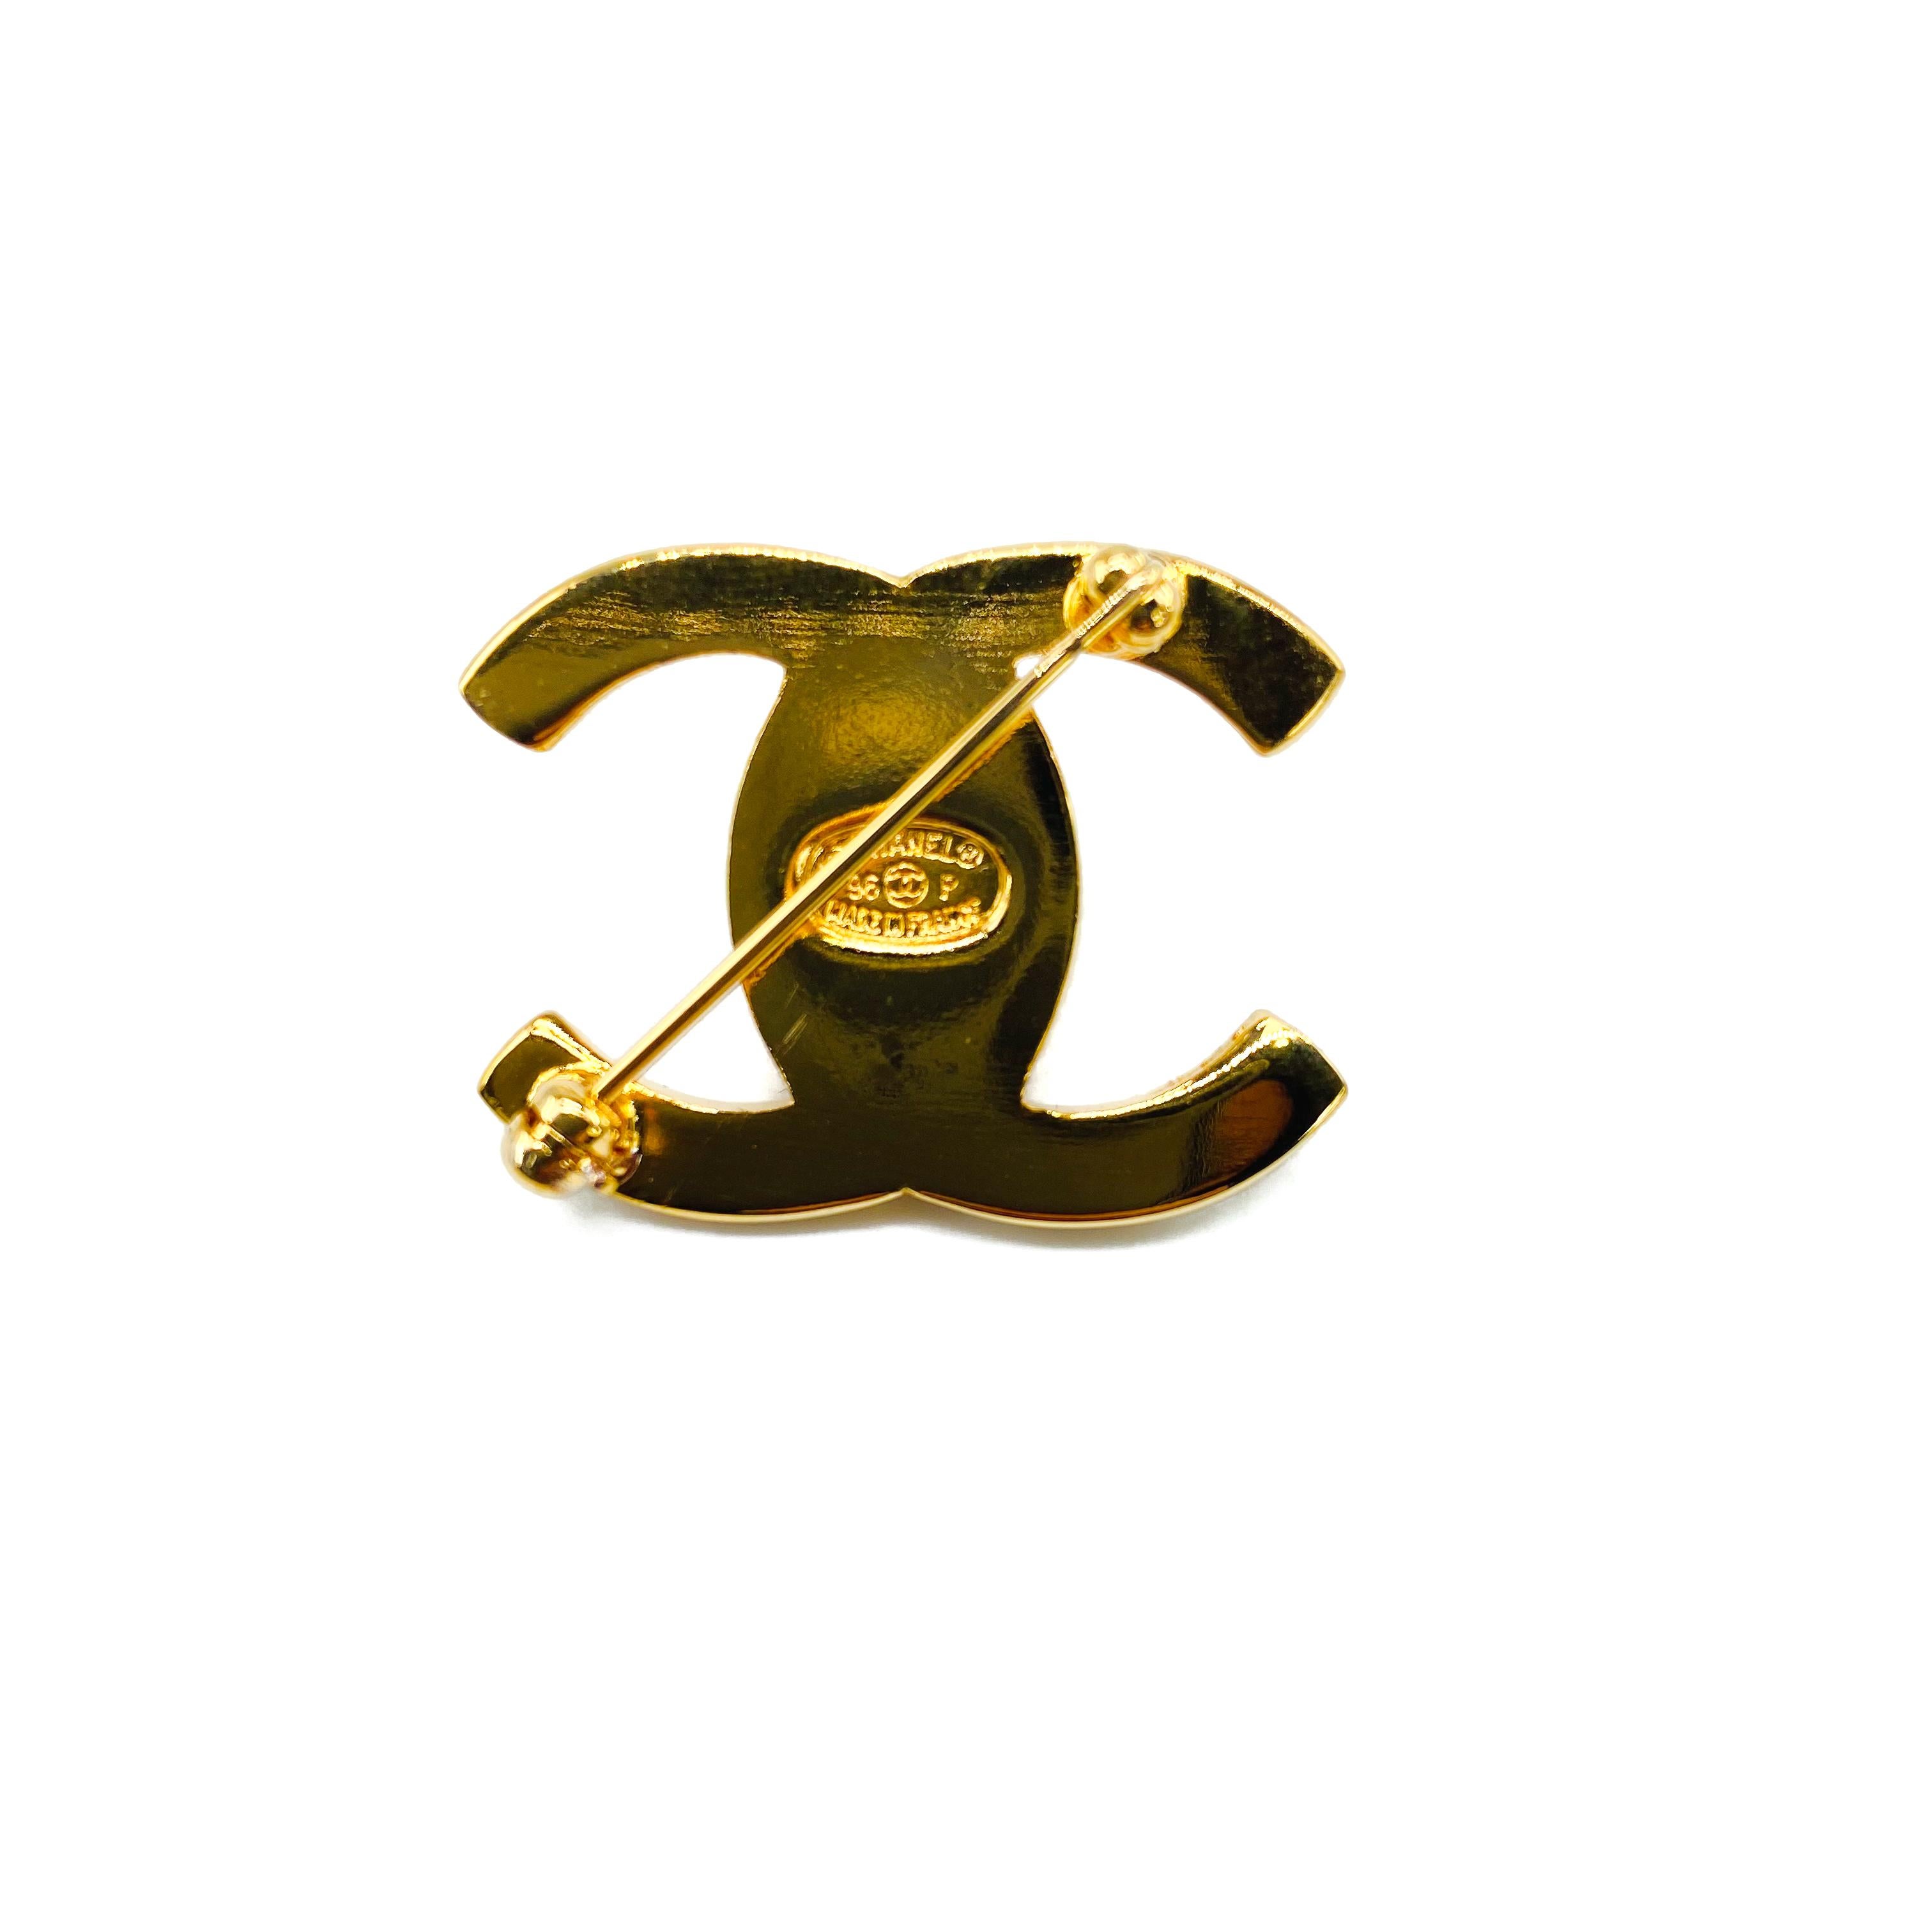 Chanel 1990s Vintage Turnlock Brooch
Iconic piece made for the Autumn Winter 1996 Collection

Detail
-Made in France in 1996 for the Autumn Winter Collection
-Crafted from gold plated metal 
-Iconic turnlock design inspired by the legendary 2.55